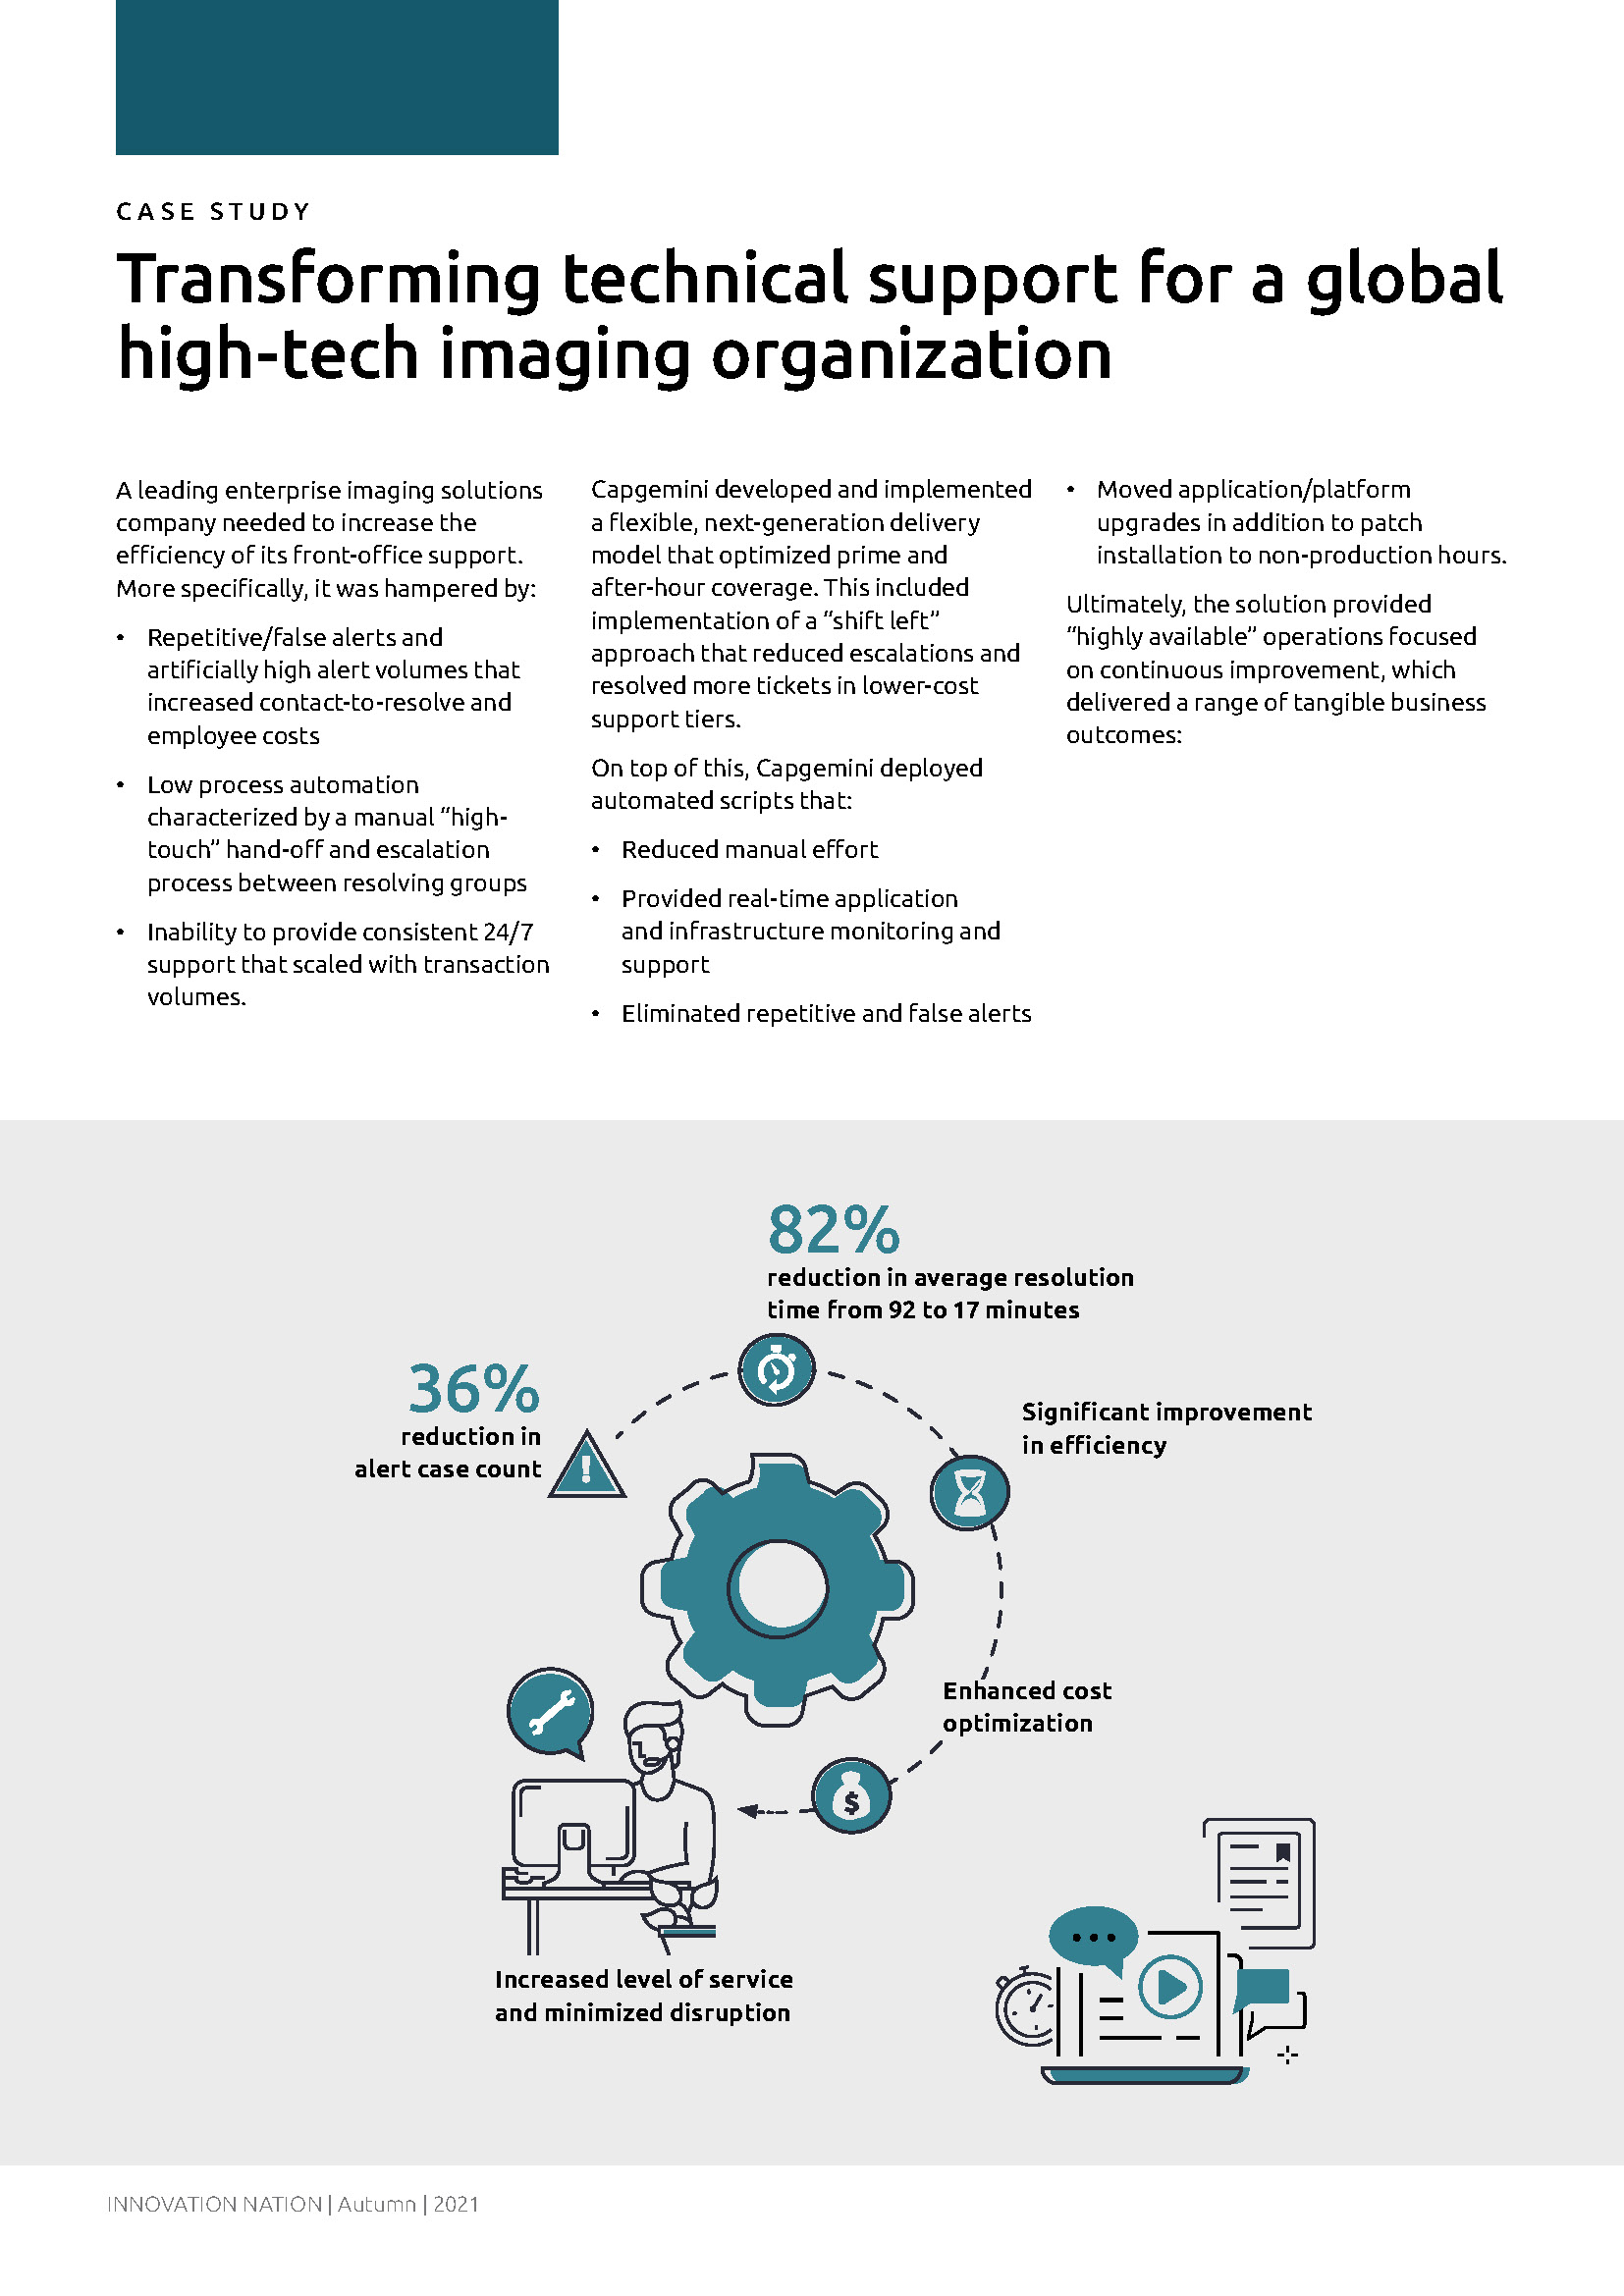 CASE STUDY - Transforming technical support for a global high-tech imaging organization v1